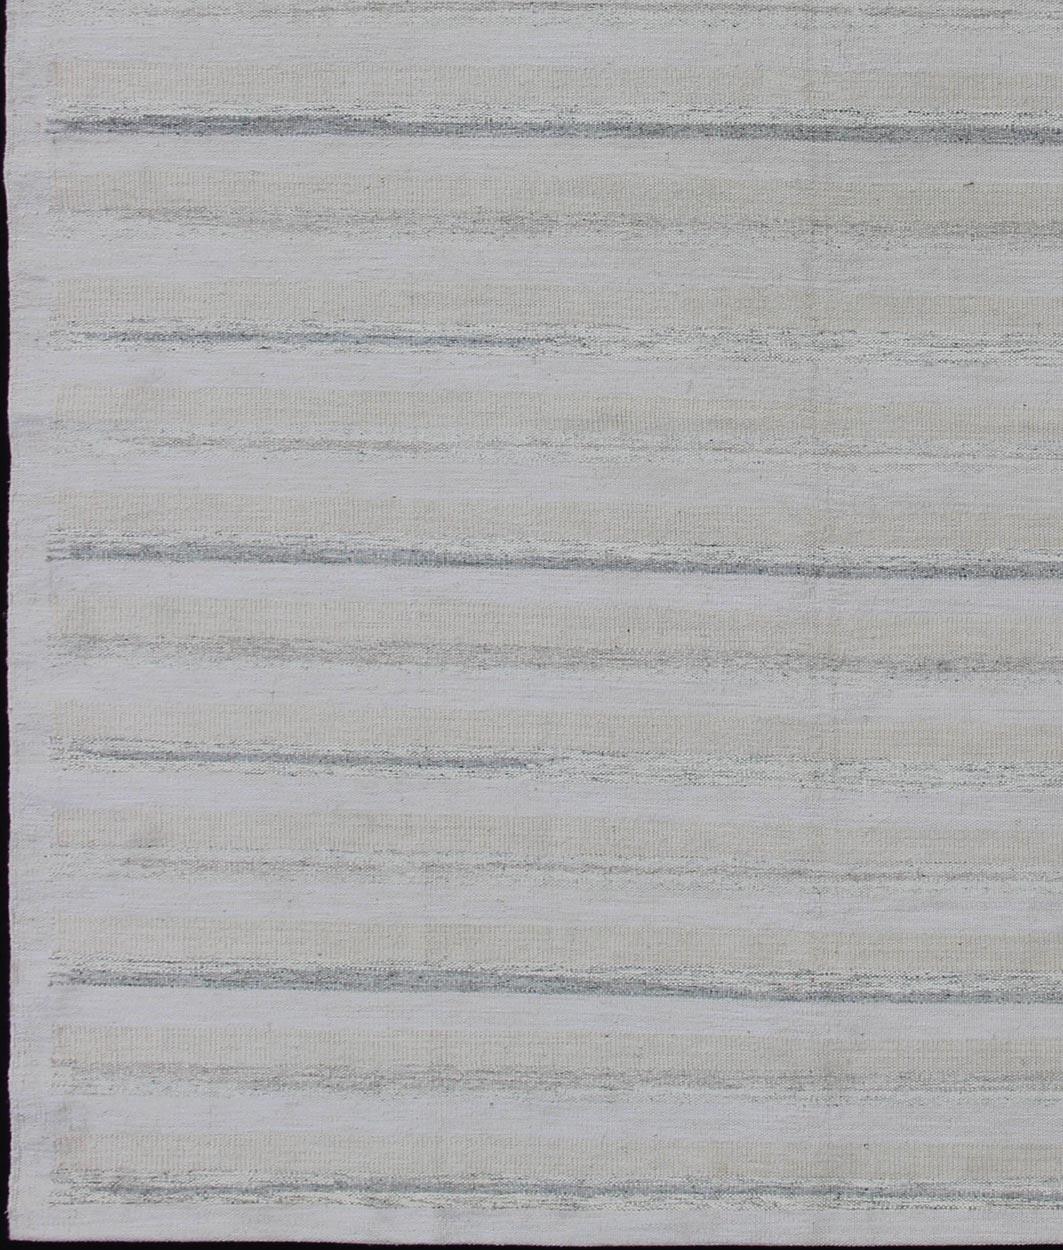 Gray Minimalist stripe design Scandinavian flat-weave rug, rug rjk-17390-shb-002-04, country of origin / type: India / Scandinavian flat-weave.

This Scandinavian flat-weave is inspired by the work of Swedish textile designers of the early to